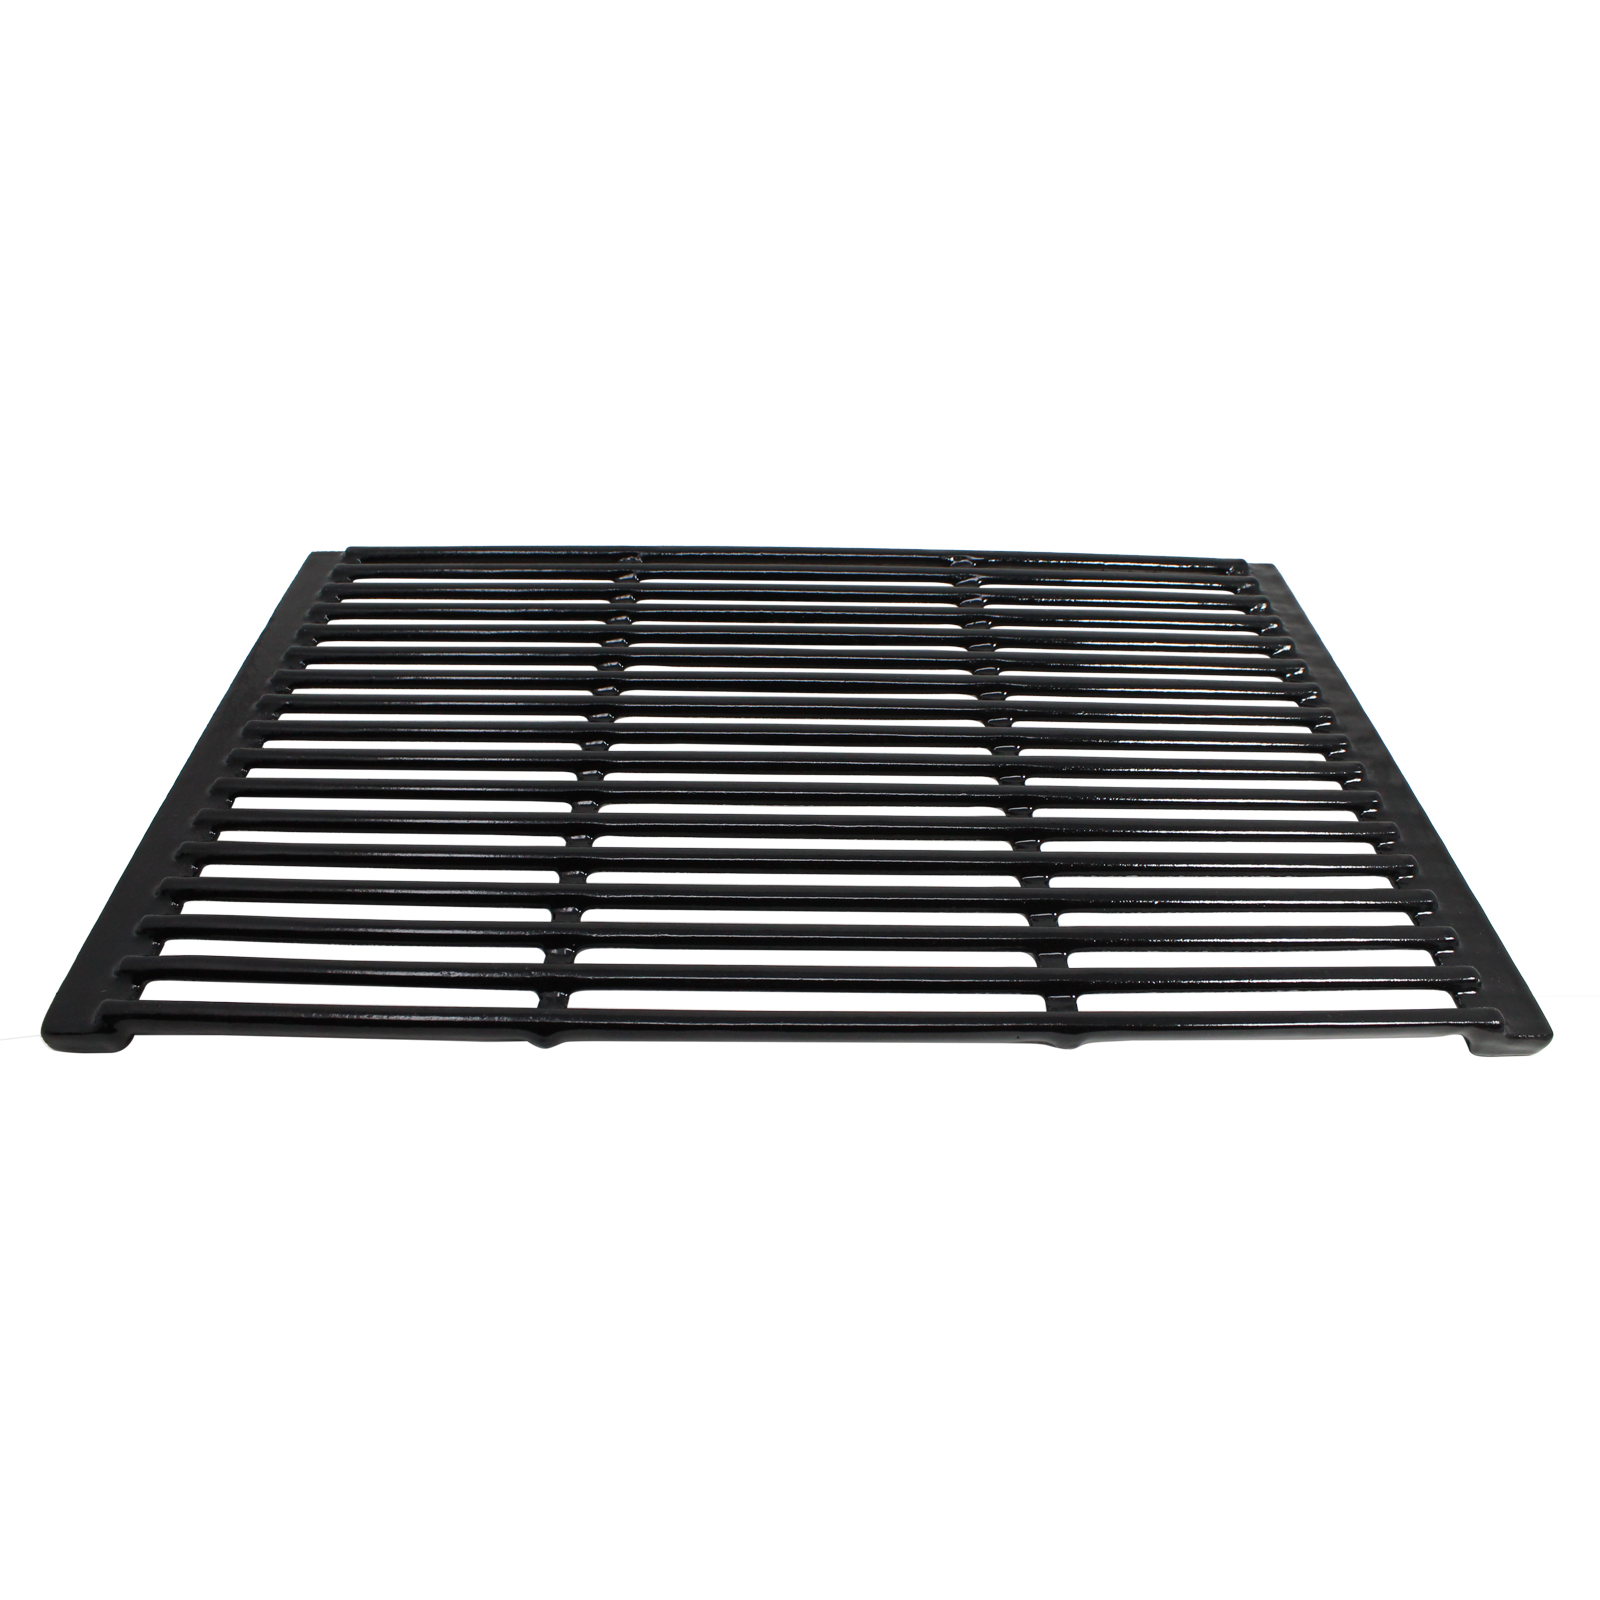 2-Pack BBQ Grill Cooking Grates Replacement Parts for Grill Pro 236464 - Compatible Barbeque Porcelain Enameled Cast Iron Grid 19" - image 3 of 4